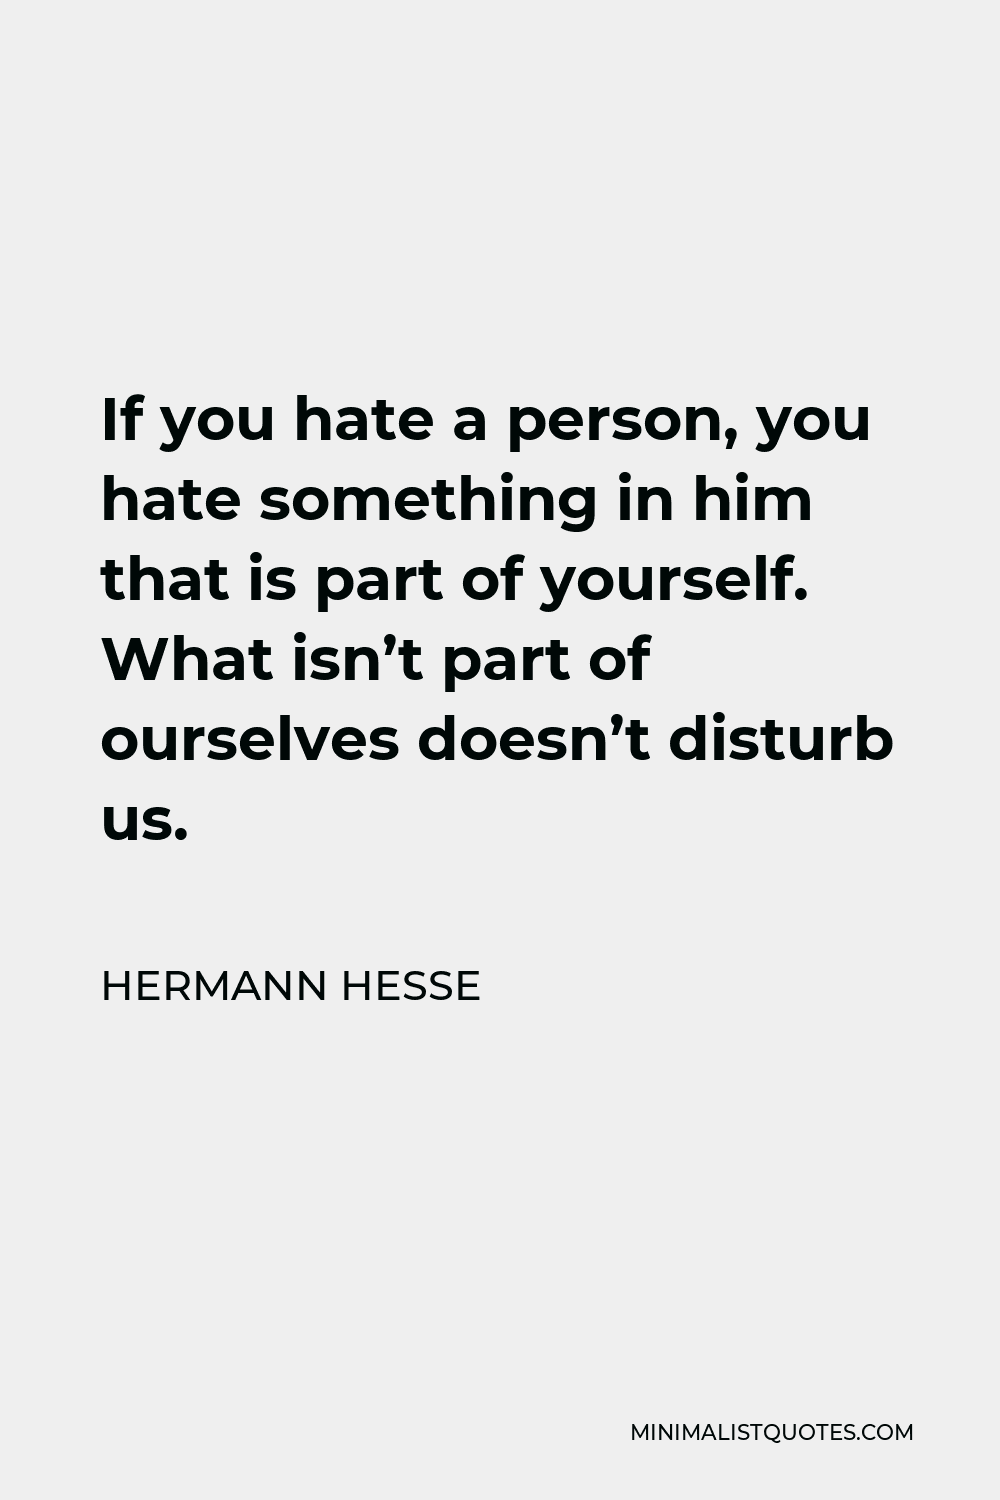 Hermann Hesse Quote - If you hate a person, you hate something in him that is part of yourself. What isn’t part of ourselves doesn’t disturb us.